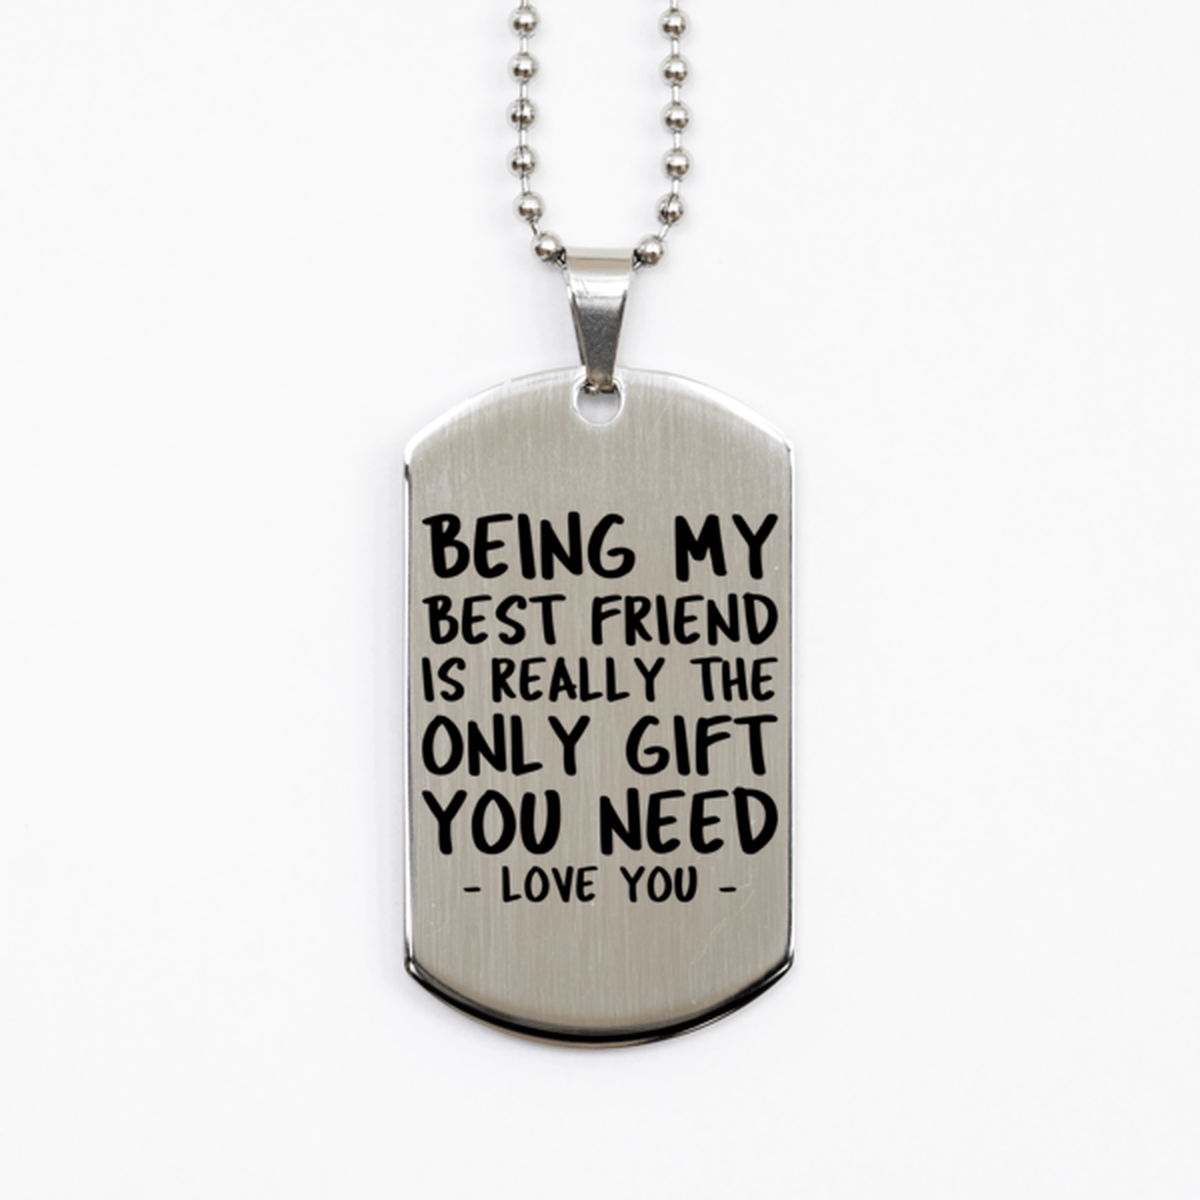 Funny Best Friend Silver Dog Tag Necklace, Being My Best Friend Is Really the Only Gift You Need, Best Birthday Gifts for Best Friend